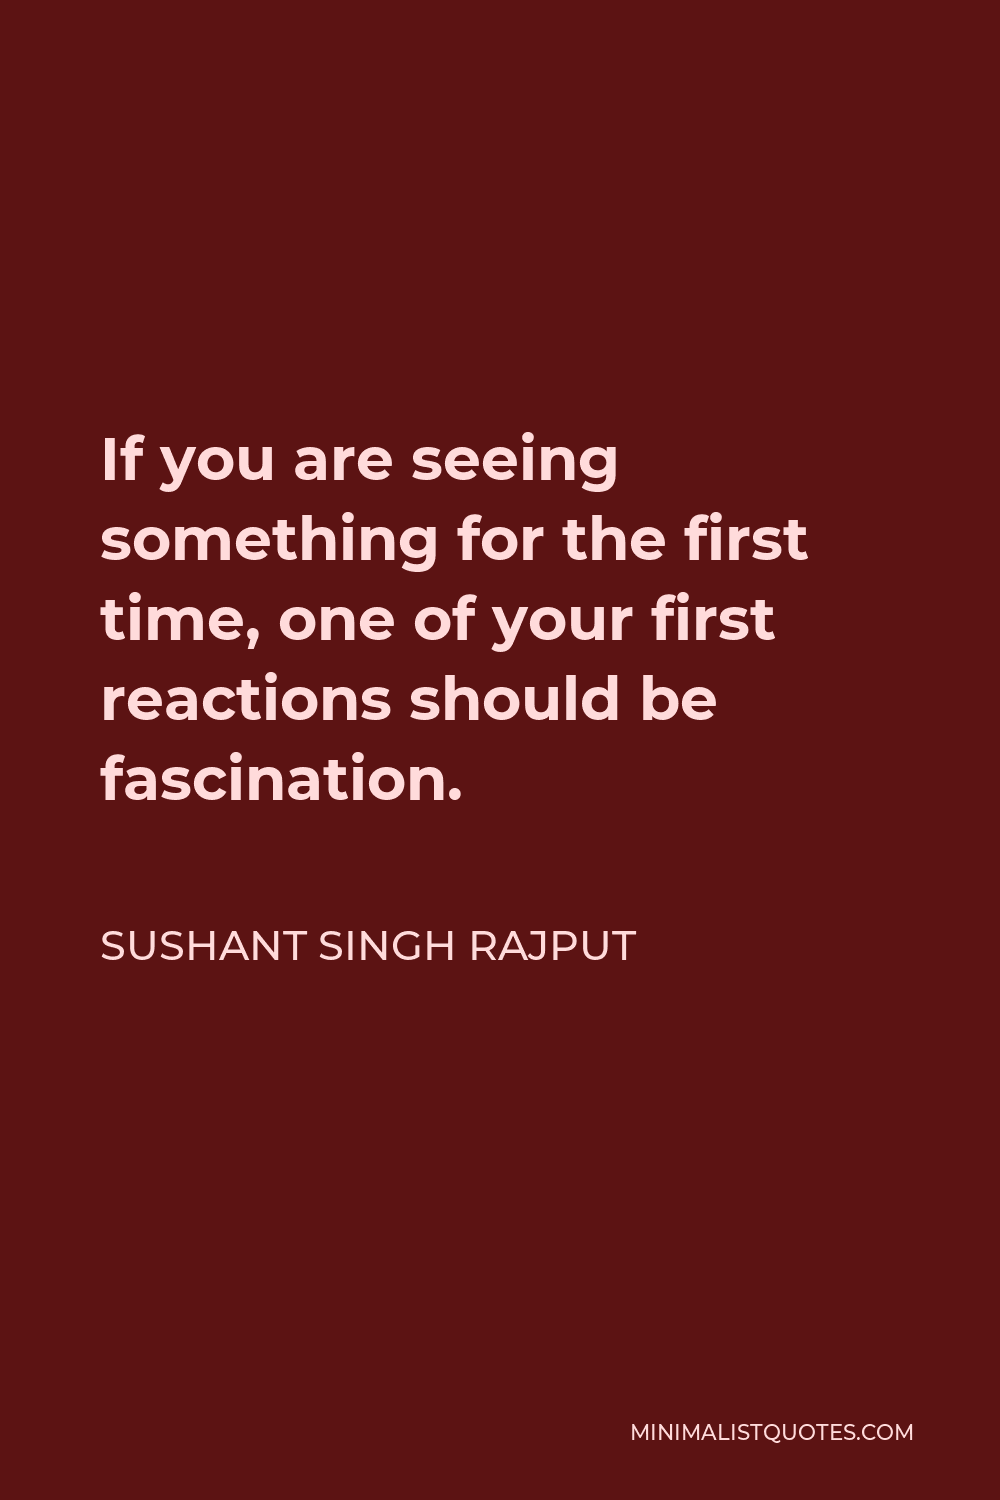 Sushant Singh Rajput Quote - If you are seeing something for the first time, one of your first reactions should be fascination.